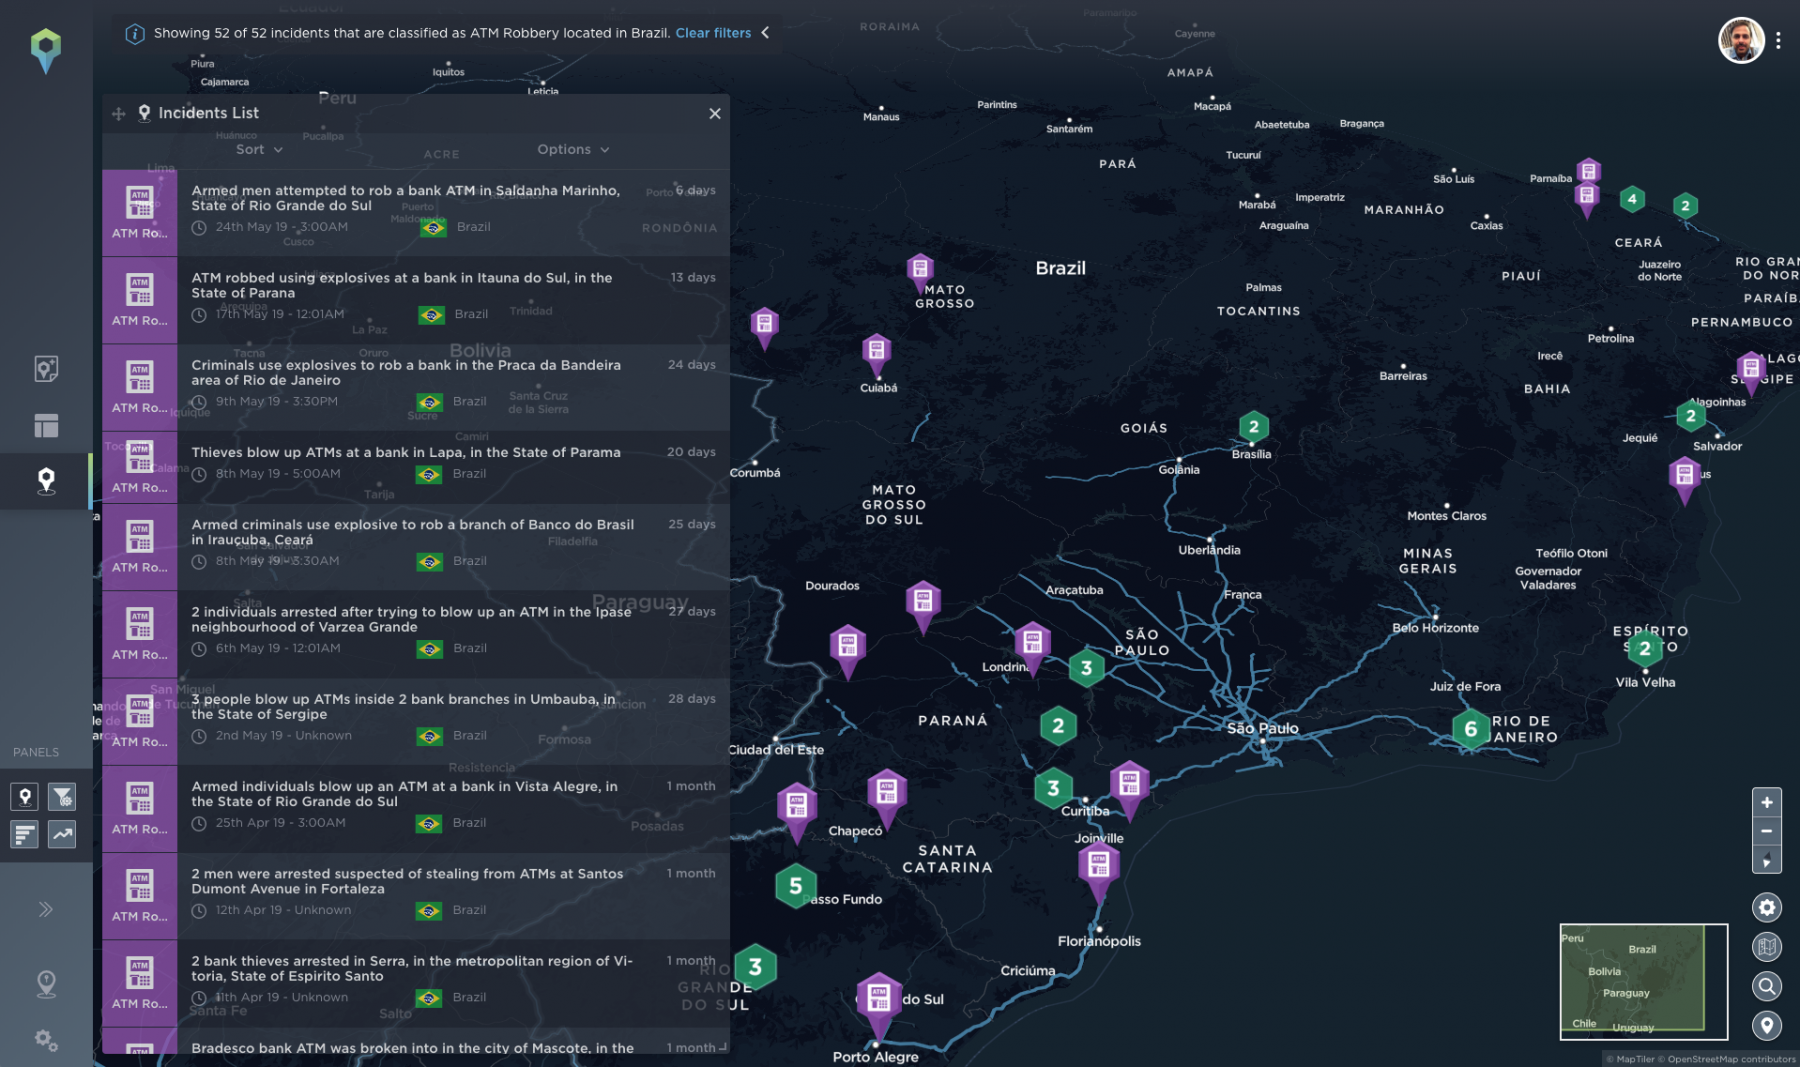 A map depicting the locations of ATM robberies across Brazil in 2019